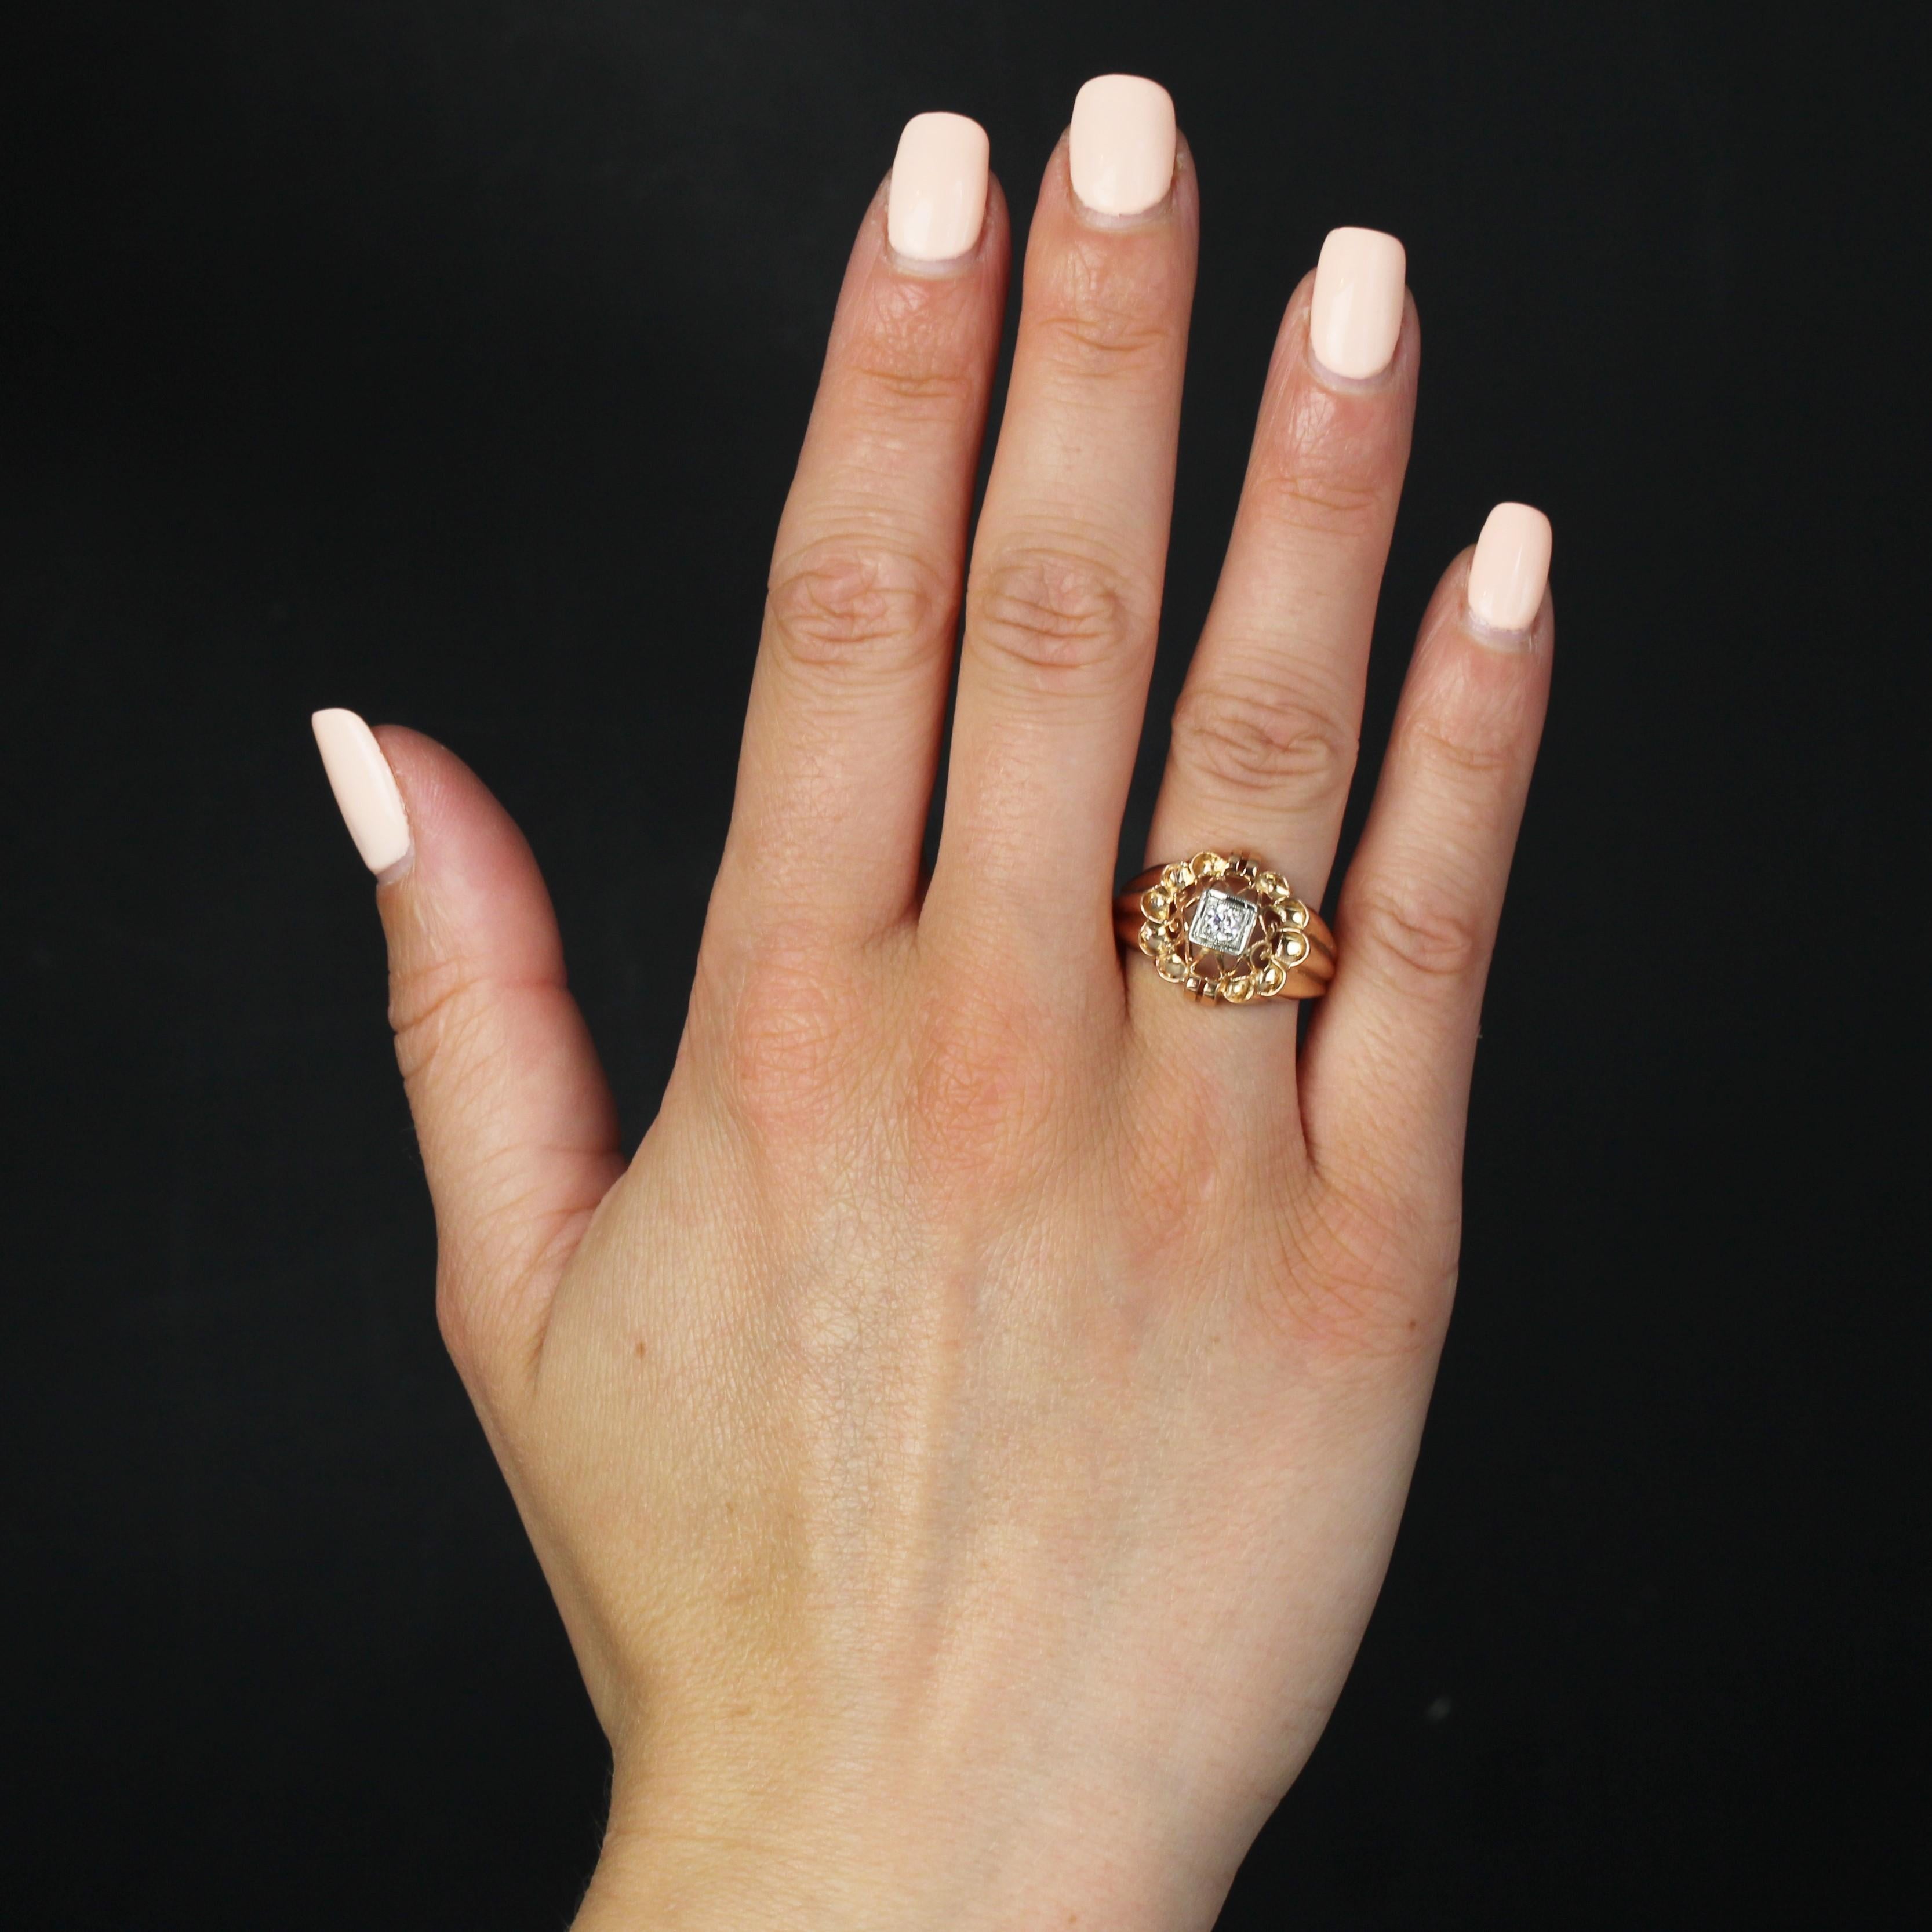 Ring in 18 karat rose gold, eagle head hallmark.
The band of this retro gold ring is gadrooned at the start and in the drop. The top is openworked with arabesque motifs and adorned in the center with a modern brilliant-cut diamond in a geometric